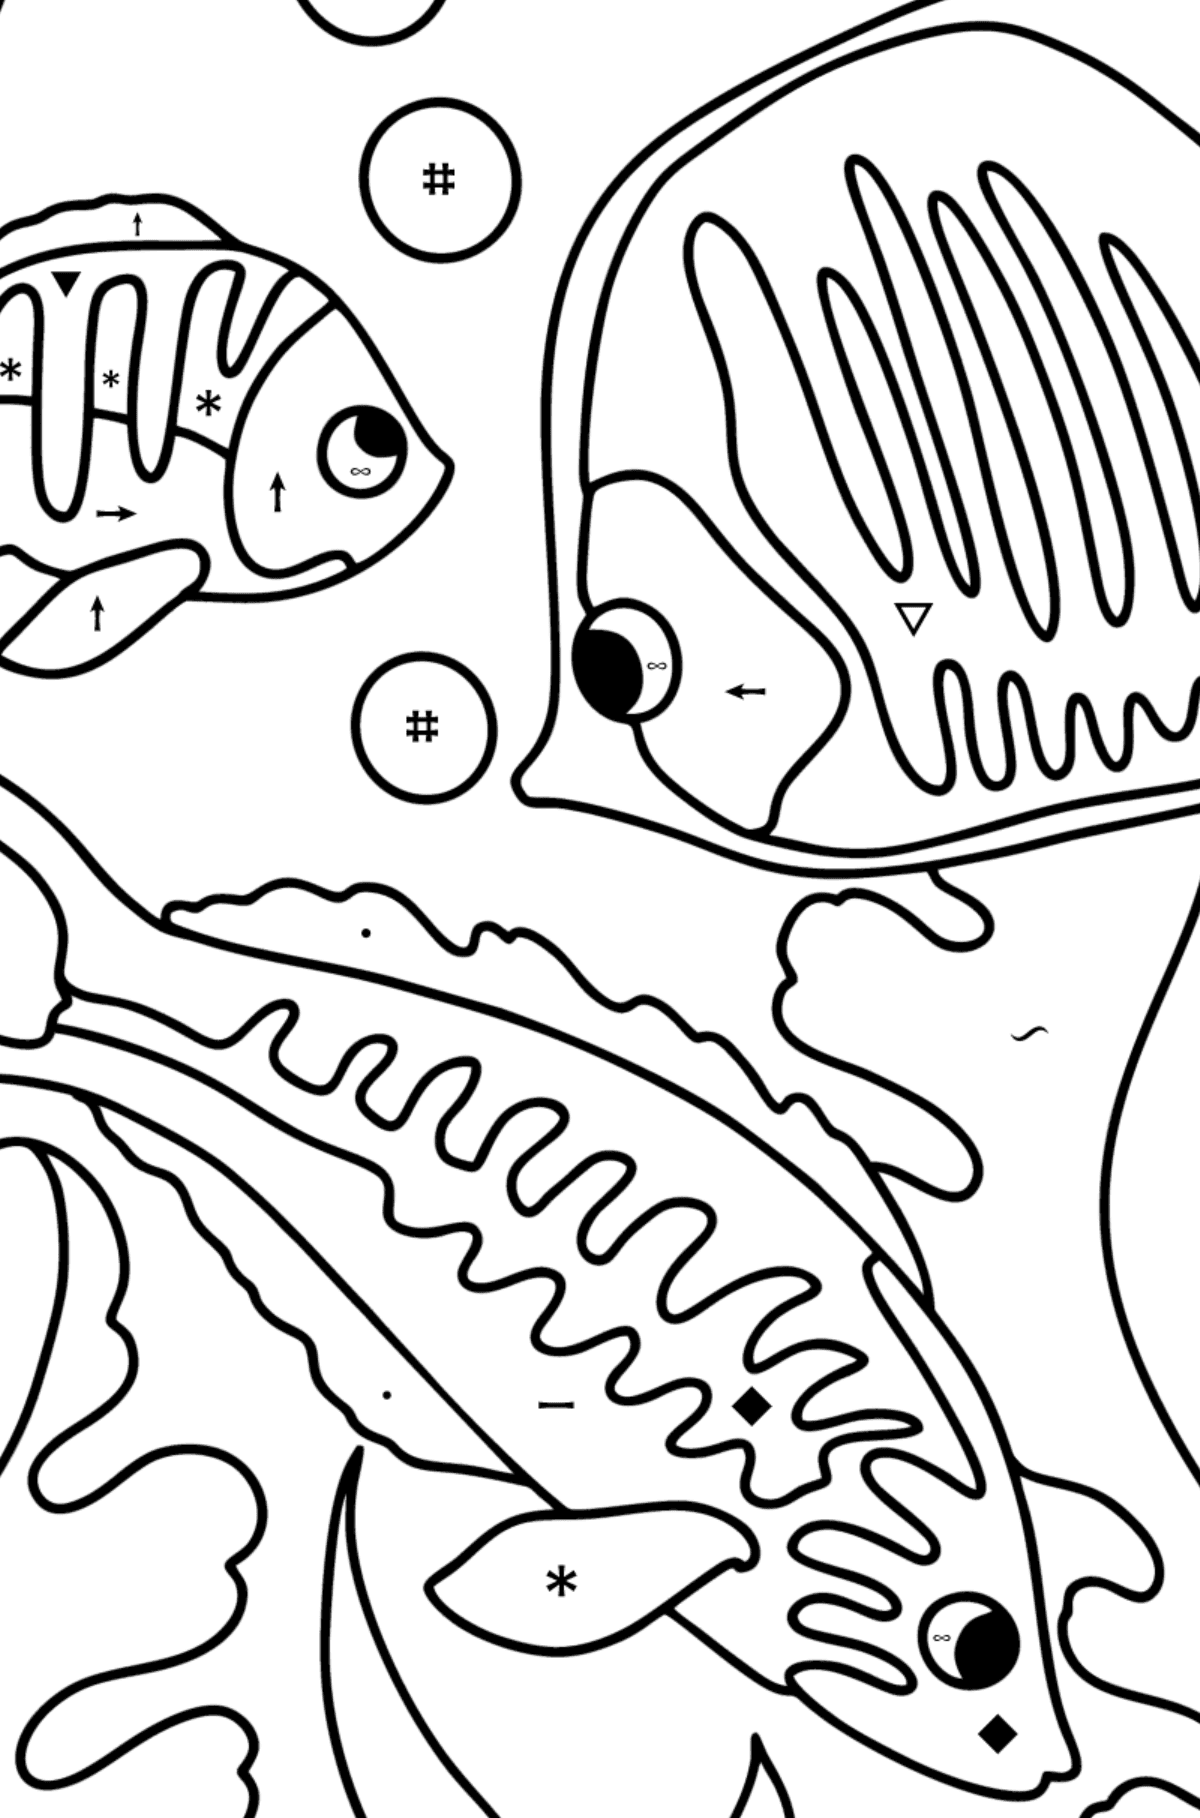 Fish in the sea coloring page - Coloring by Symbols for Kids